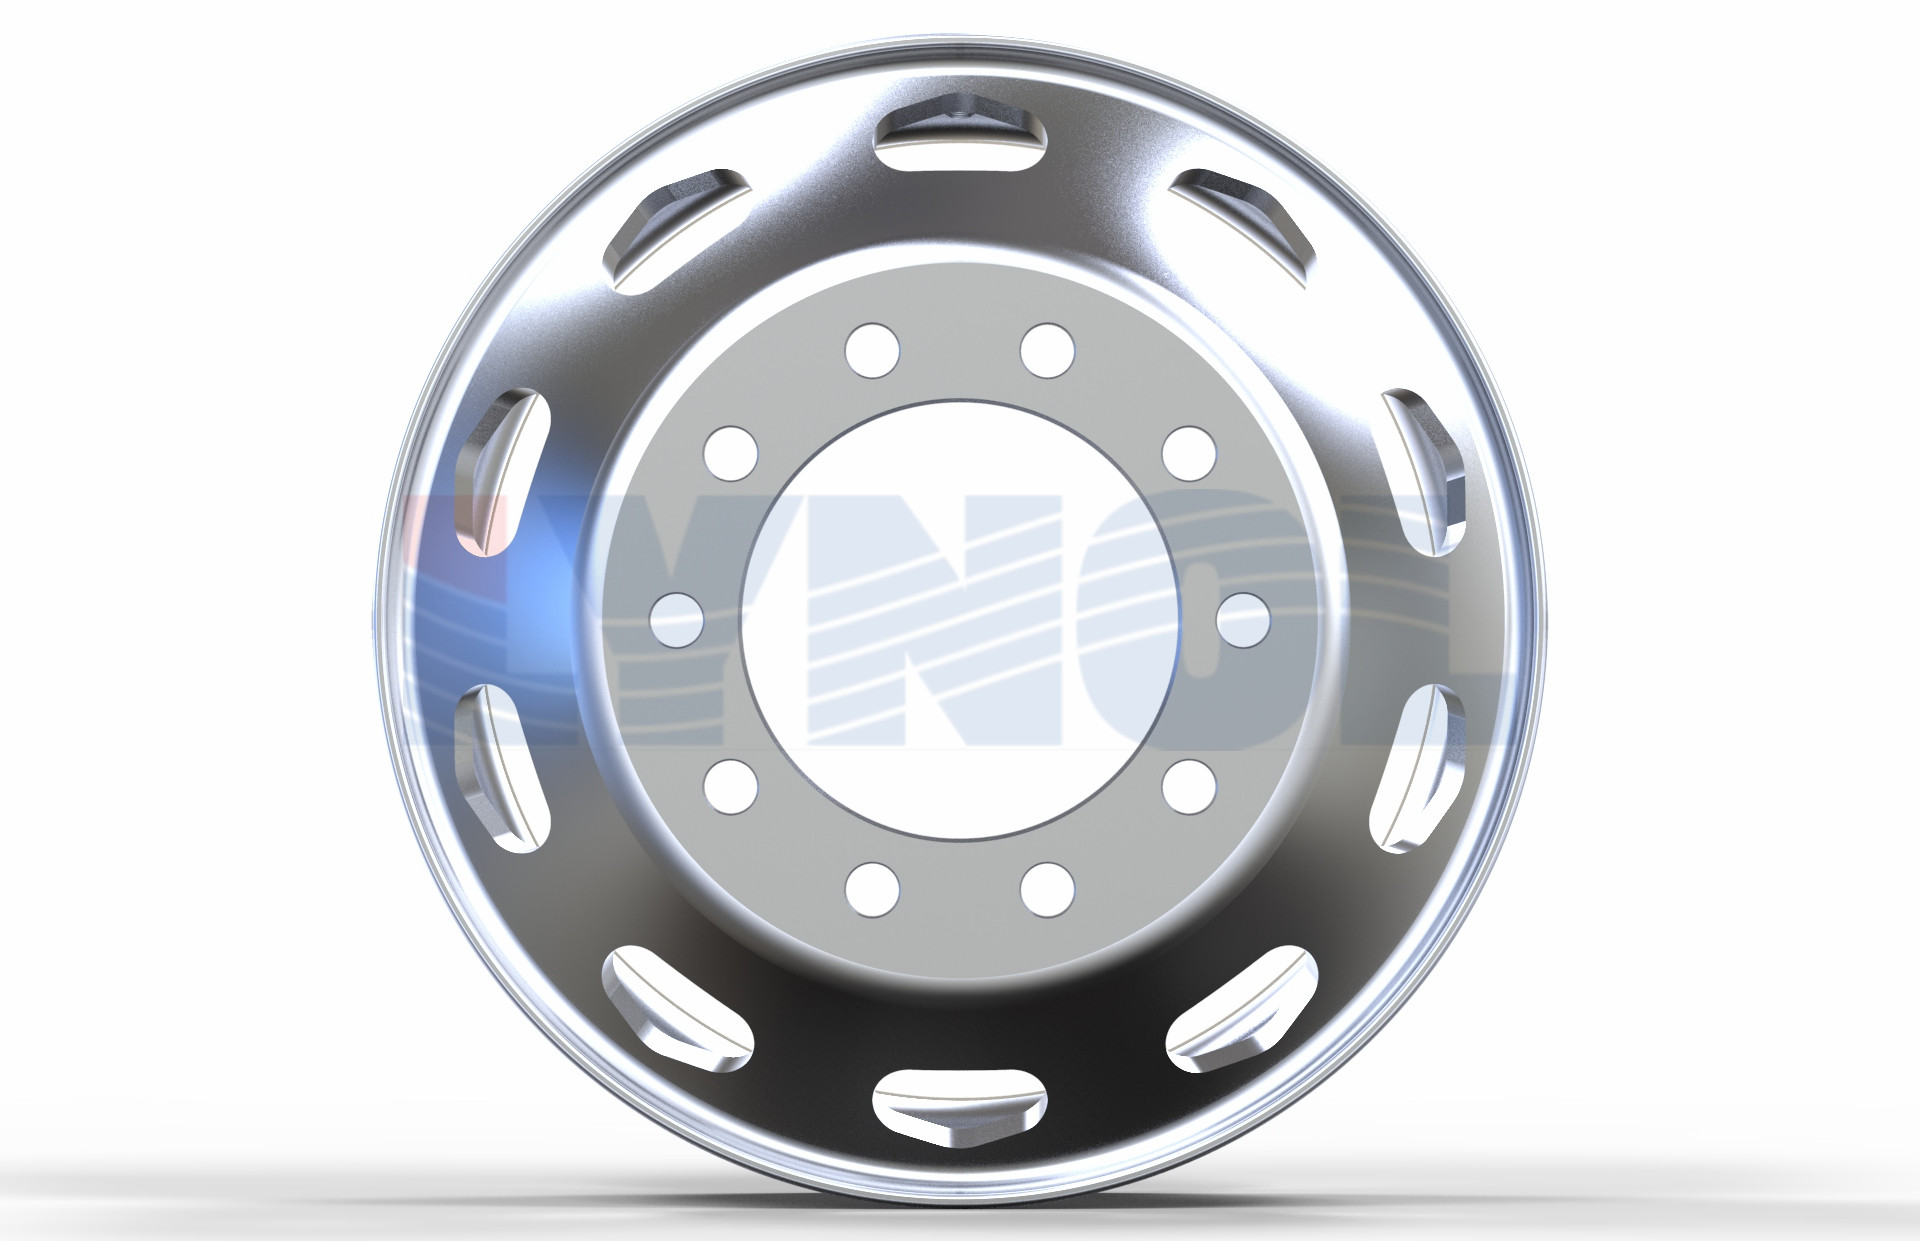 2800-006 - WHEEL - Truck Wheel 22.5X8.25 15 DC Hub   Piloted Both Sides Polished 6061-T6 A-Style